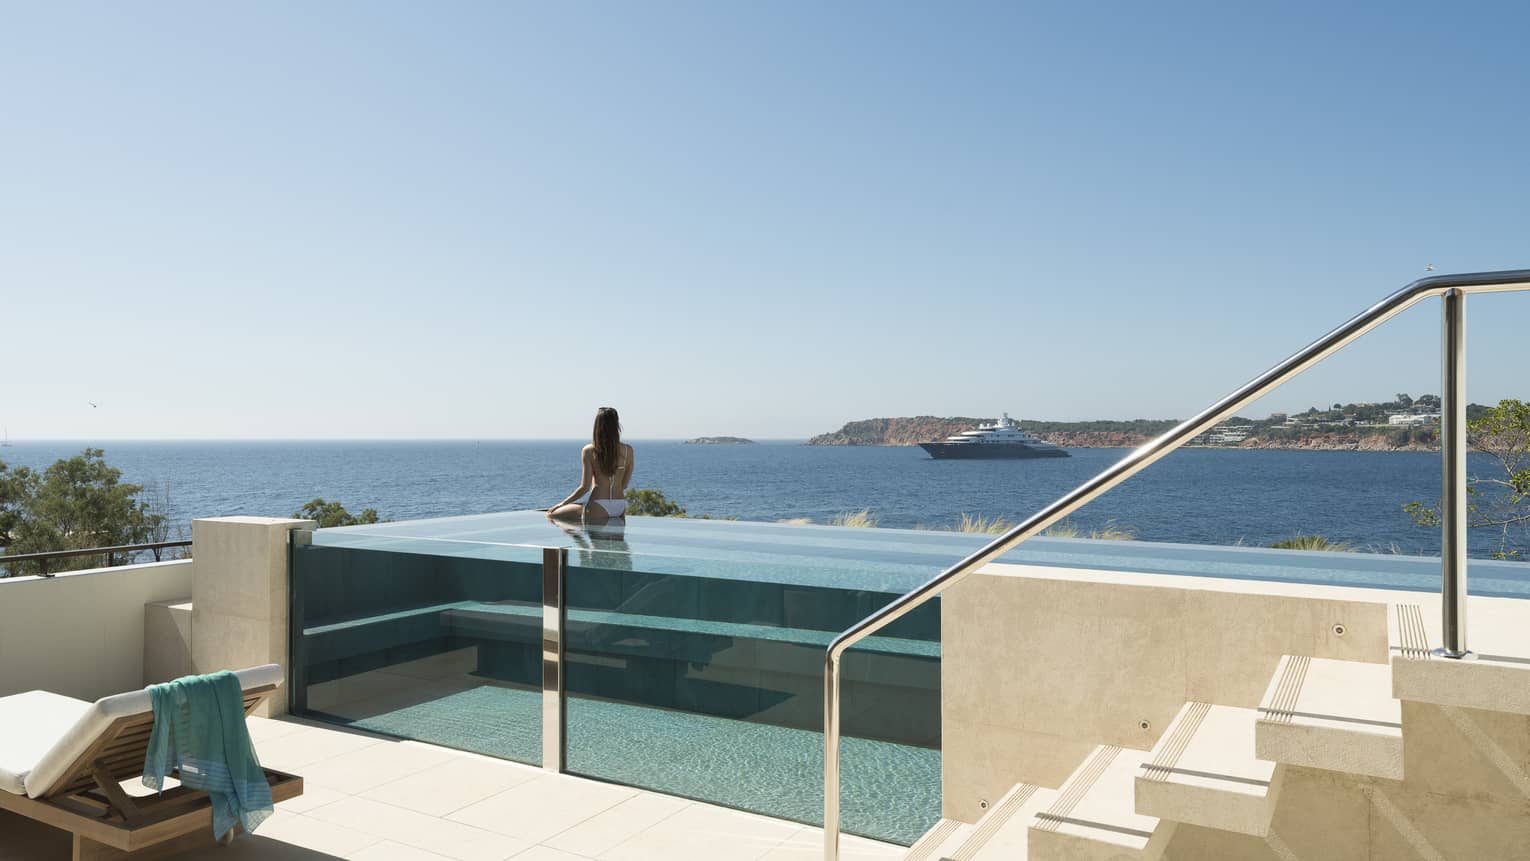 Terrace with staircase and glass infinity pool, a woman wearing white bikini in pool looks out to sea